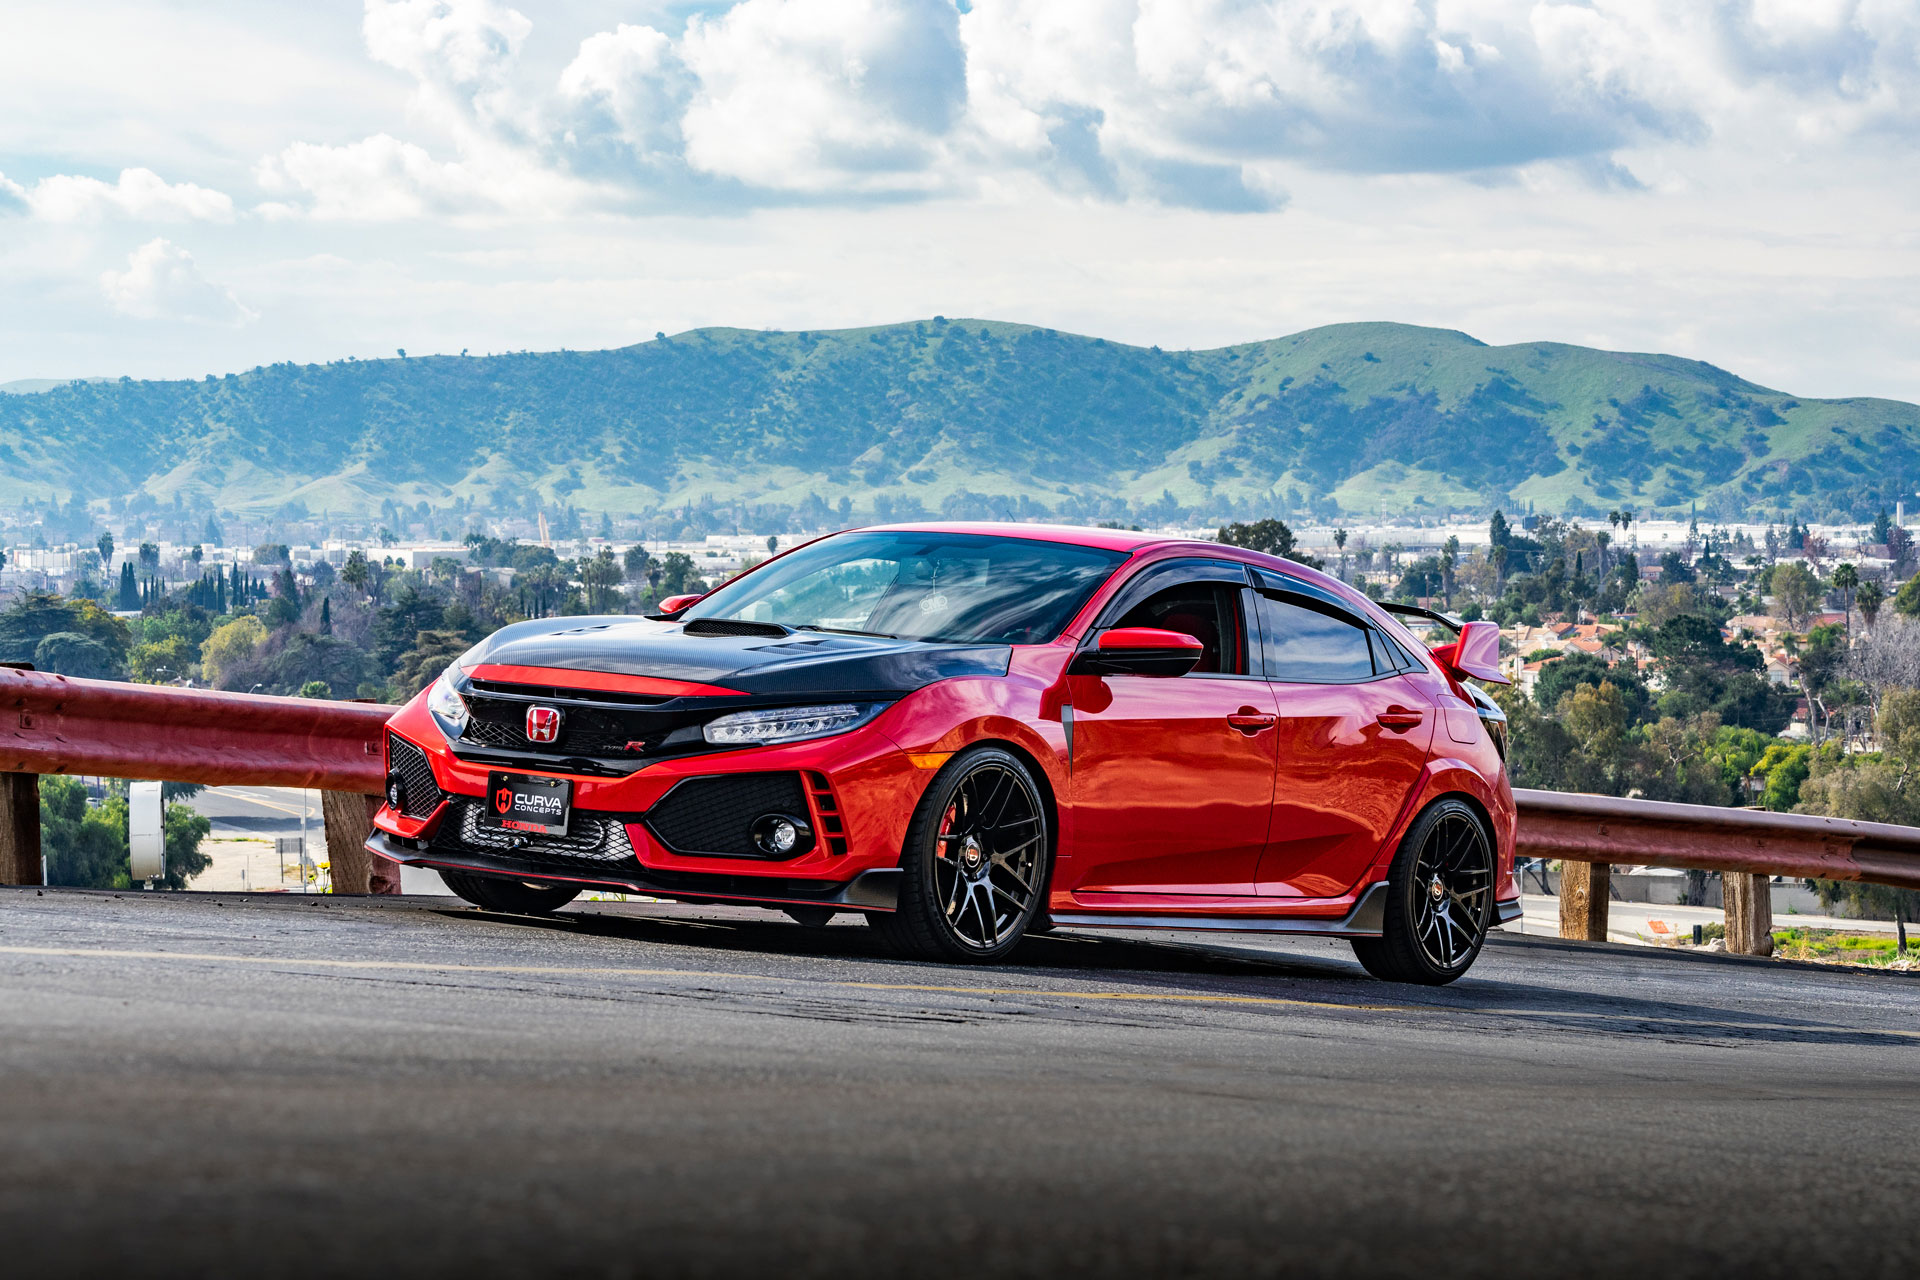 Curva Concepts C300 Aftermarket Wheels on a Honda Civic Type-R